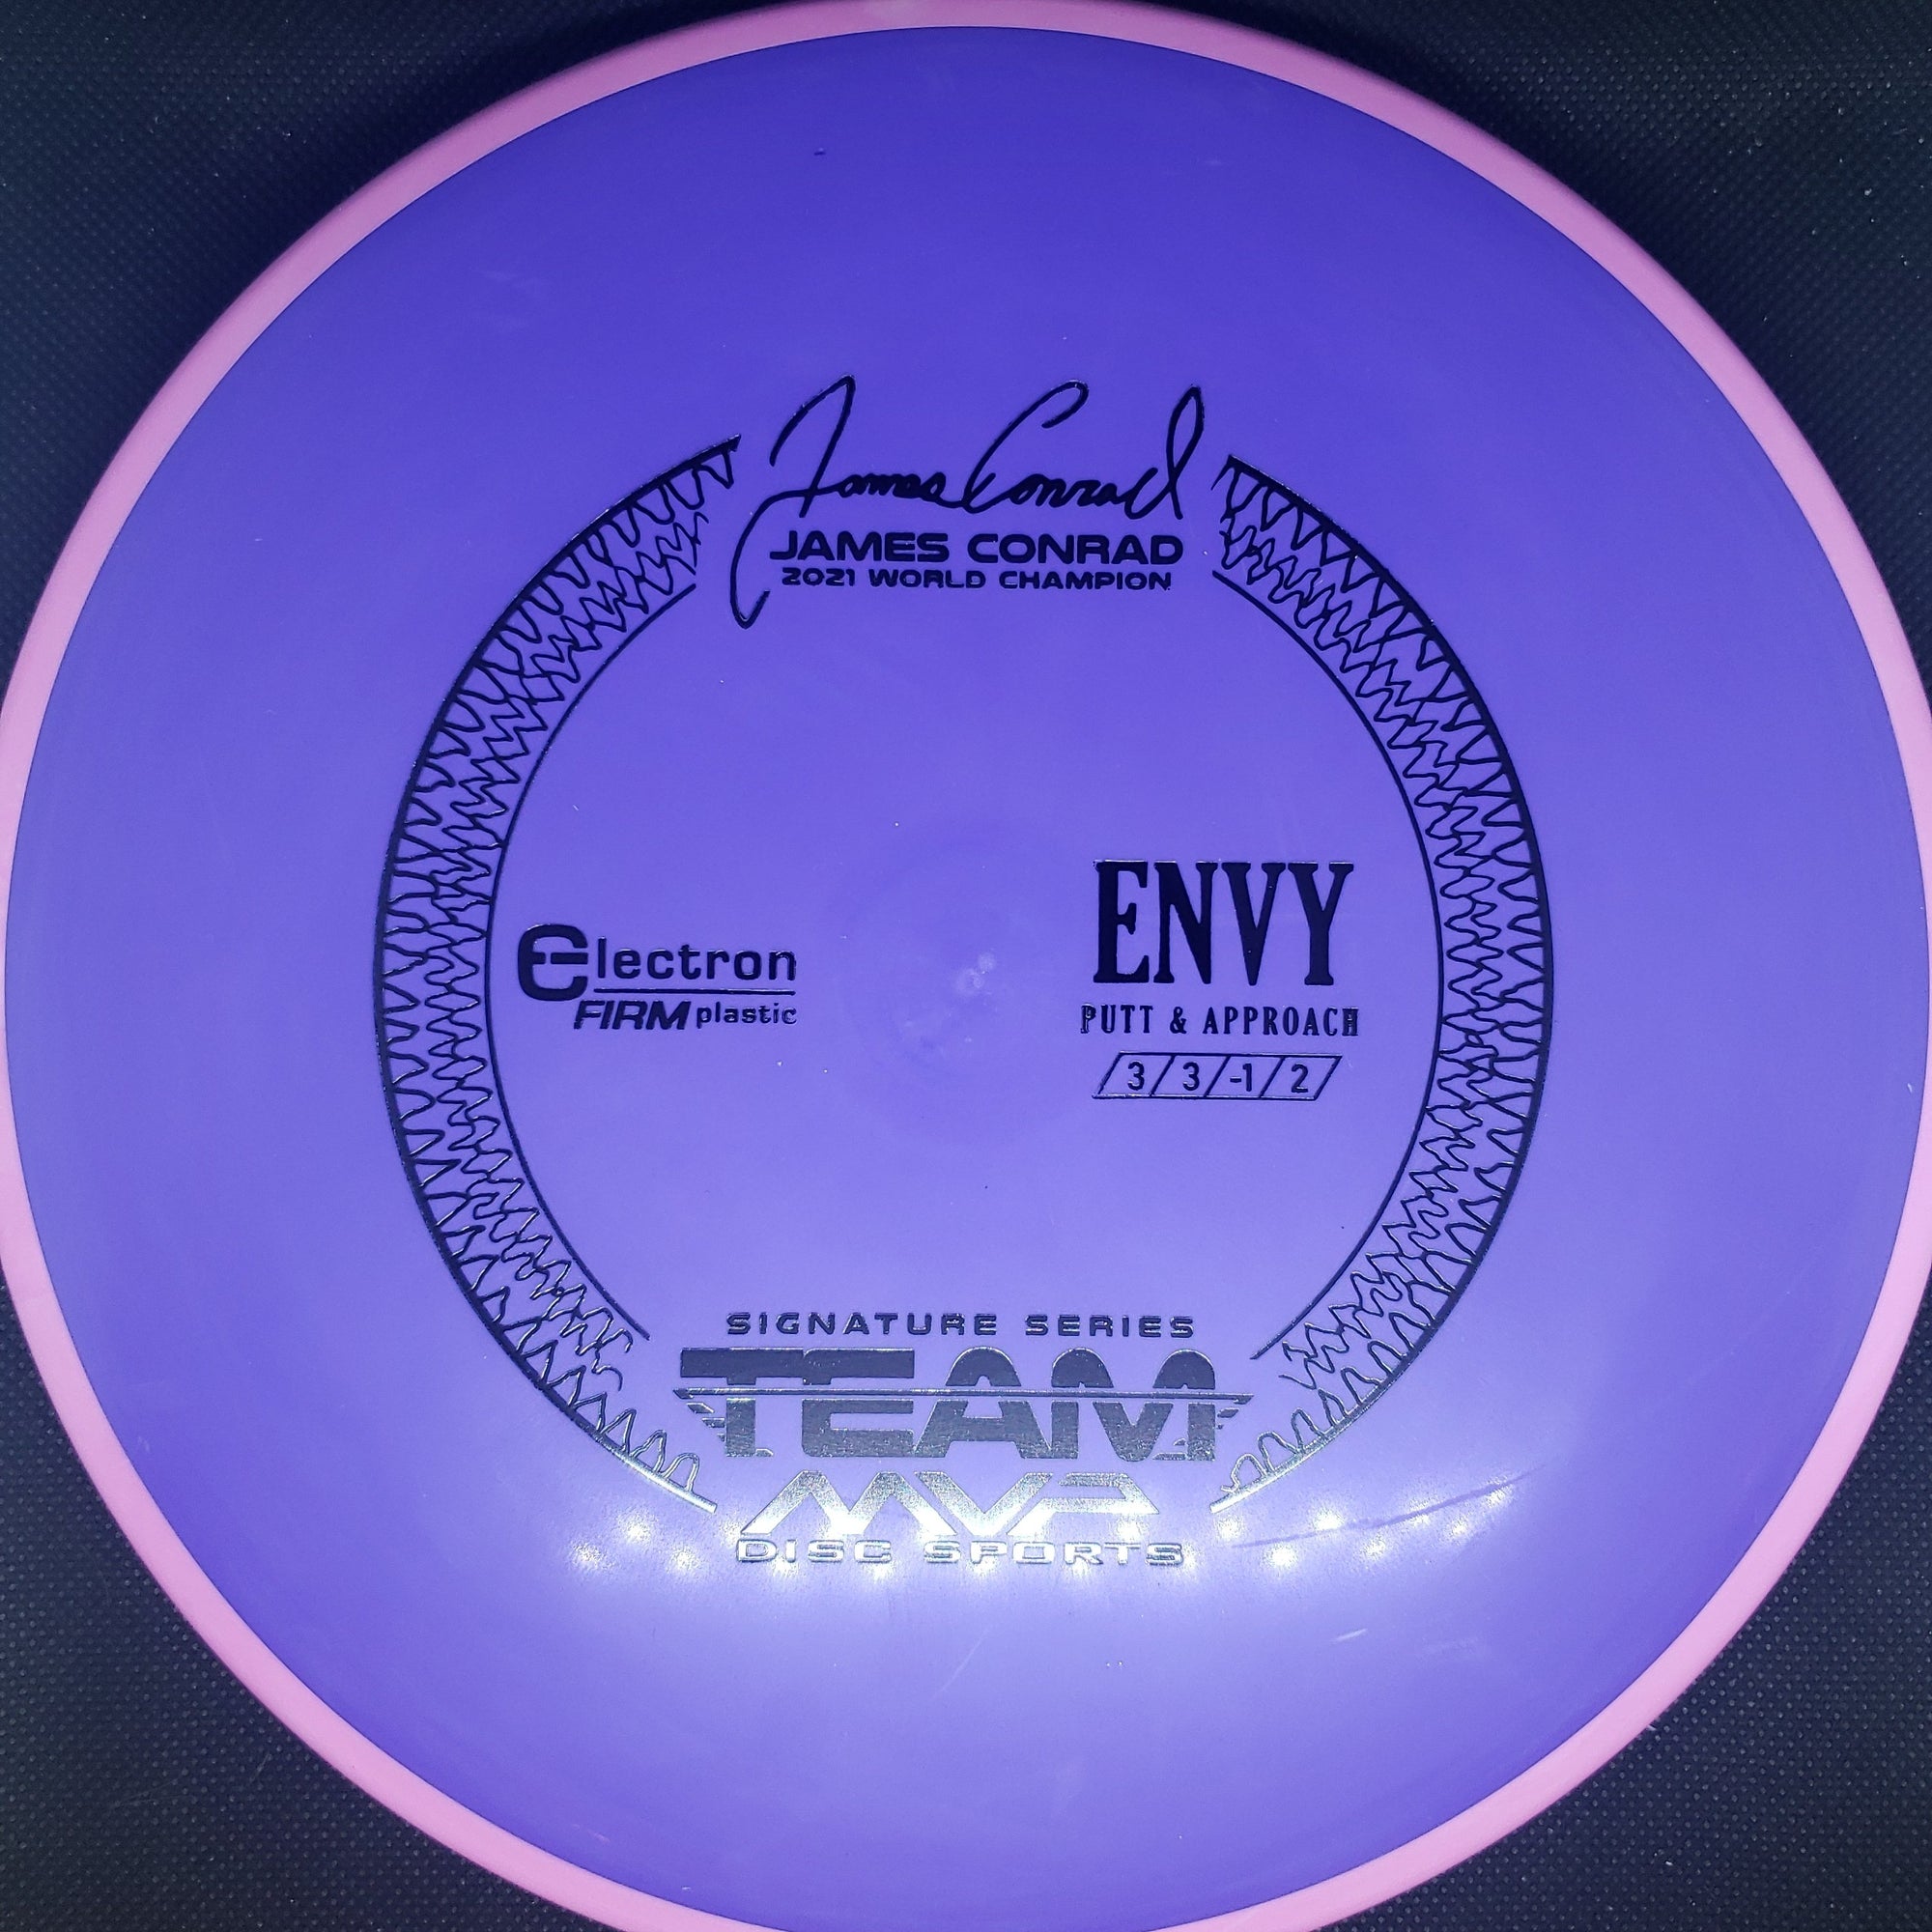 MVP Putter Purple Plate Pink Rim 174g Products James Conrad Signature Envy, Electron Firm